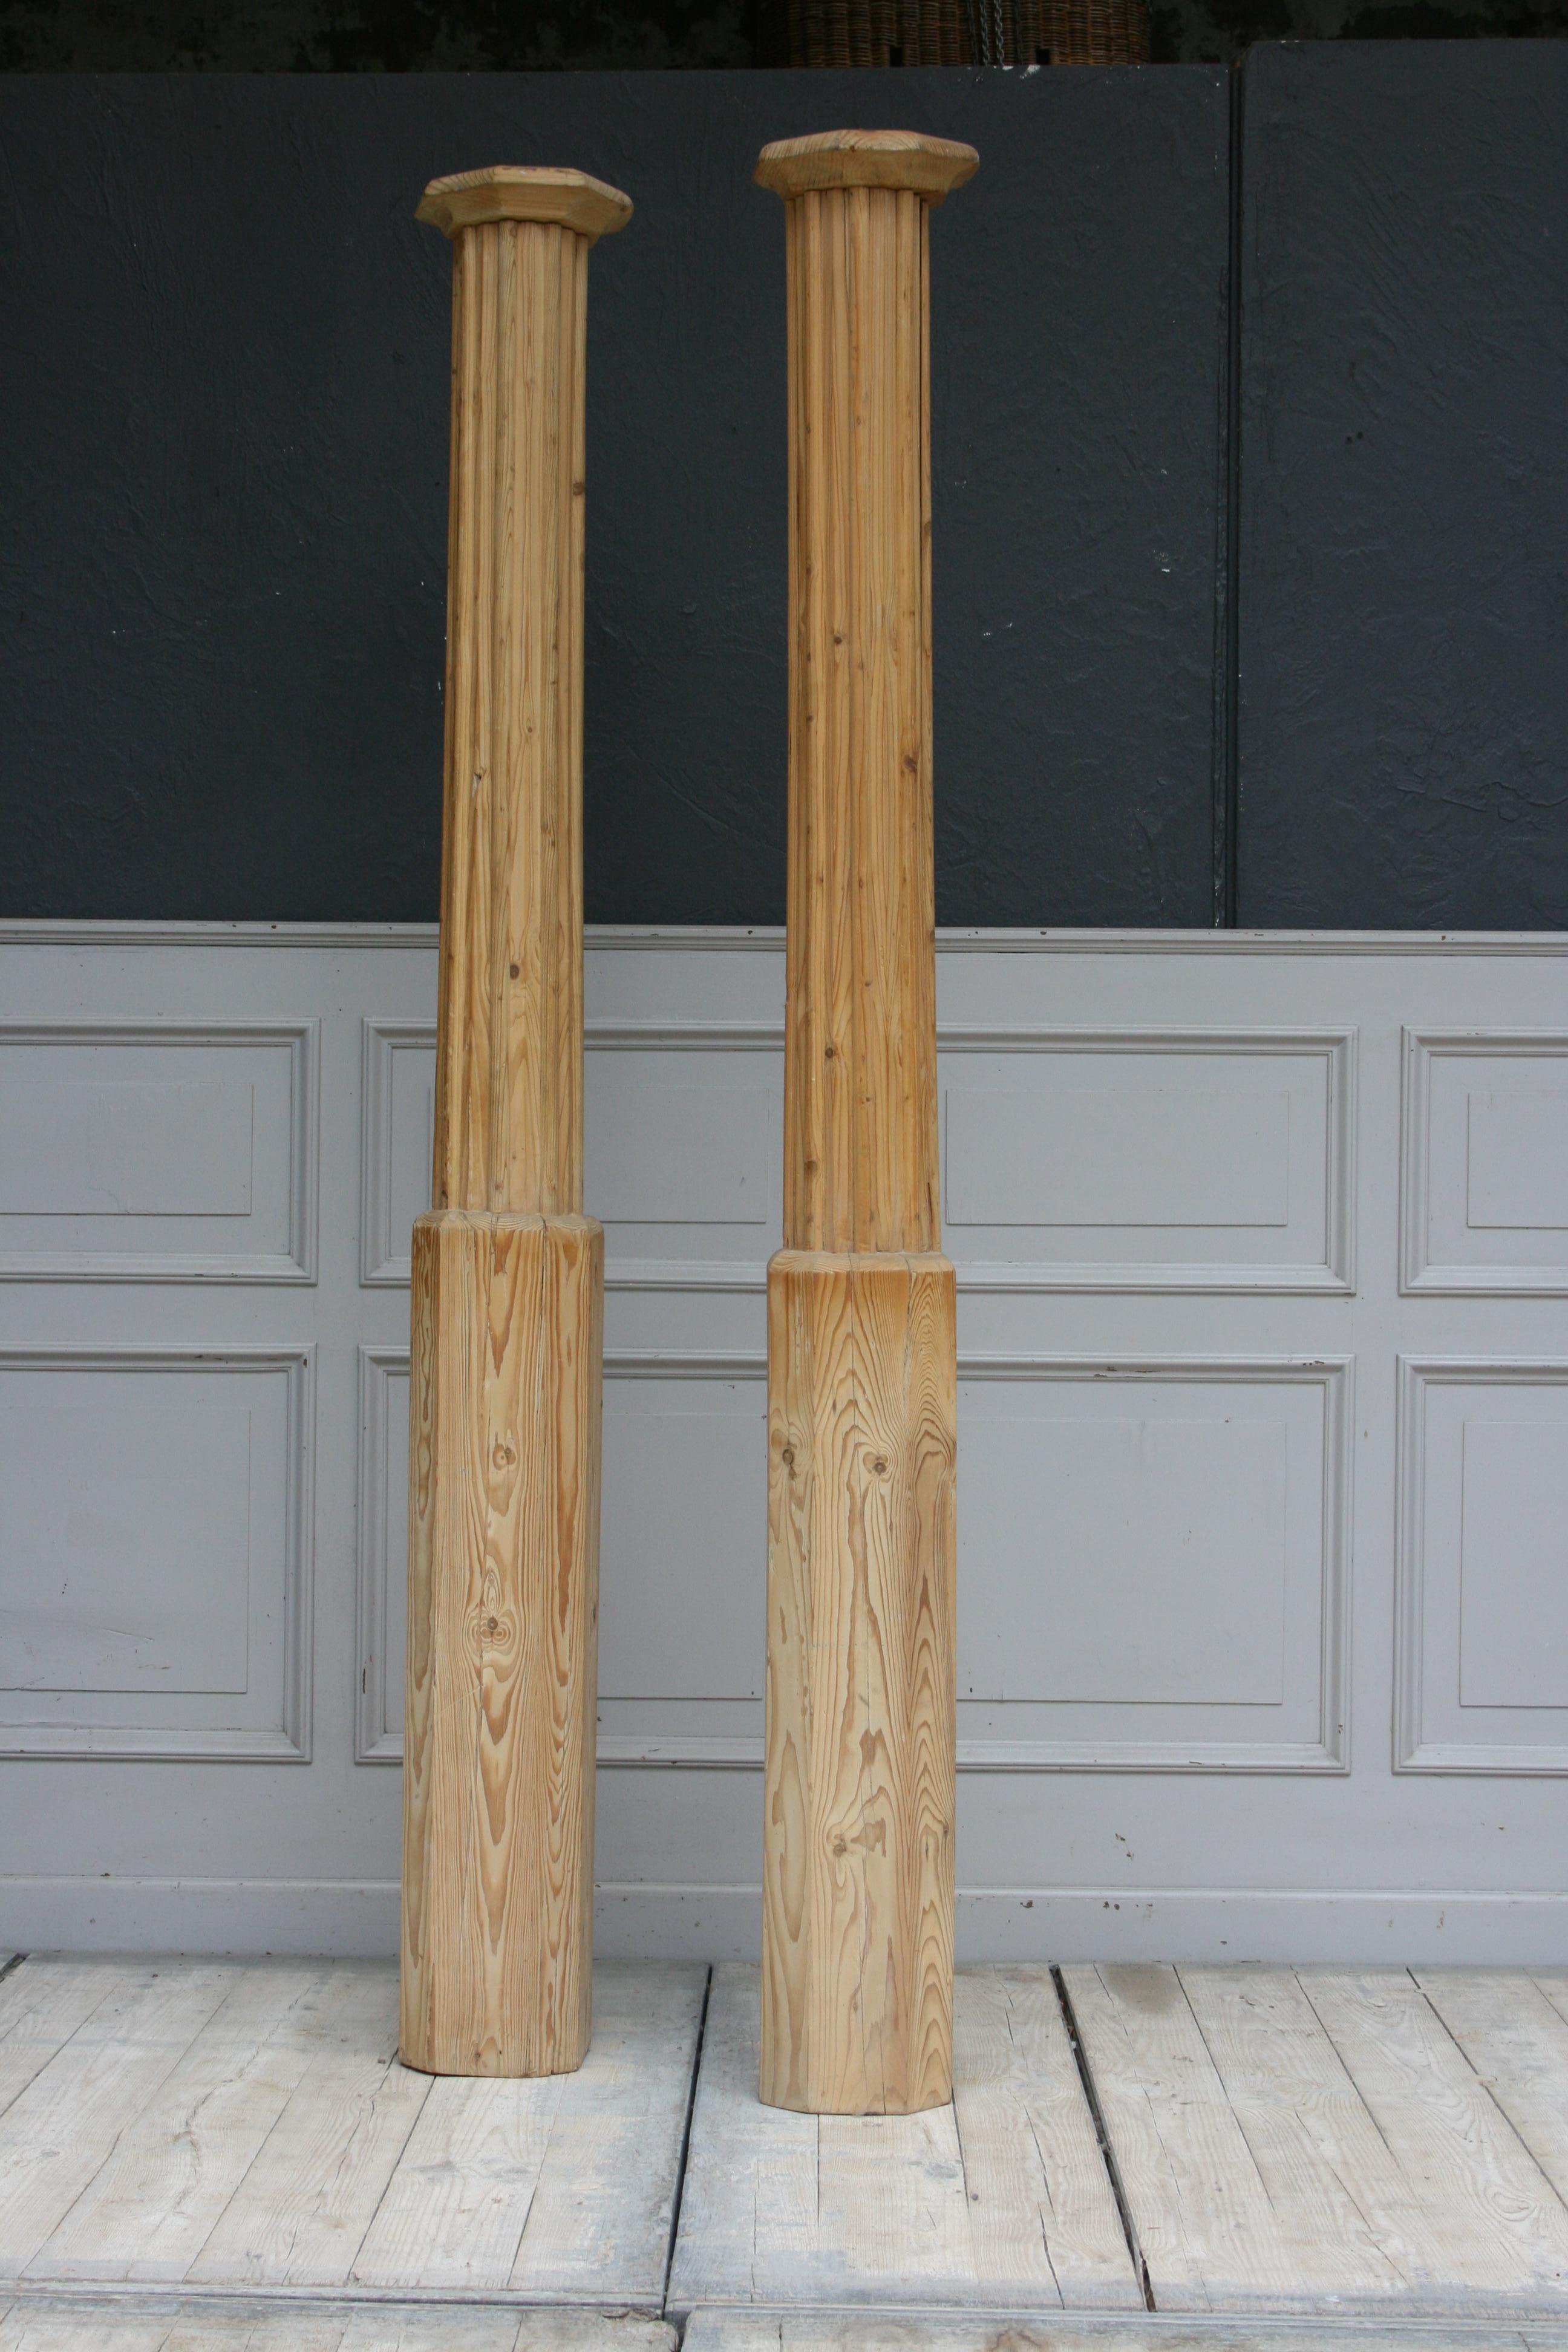 Pair of antique pine columns from a church in Southern Germany, freed of old paint. Each solid from a tree trunk (see last picture).

Dimensions:
200 cm high, / 78.74 inch high
Diameter 22 cm / 8.66 inch.